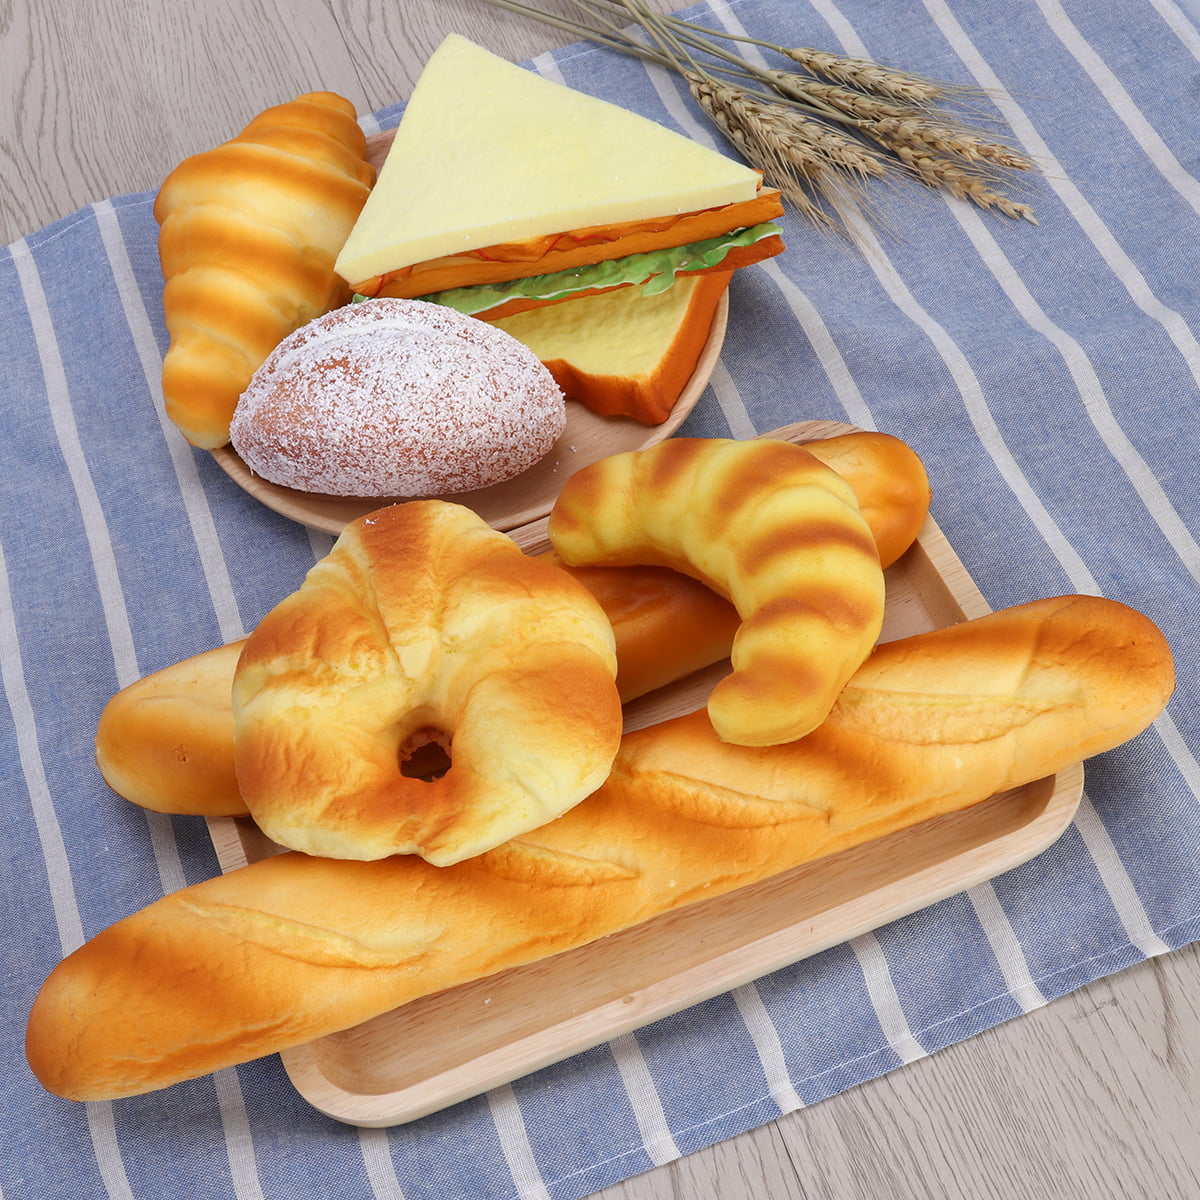 6 Pieces Artificial Bread Set Fake Muffin Model Photography Props Home Decor 